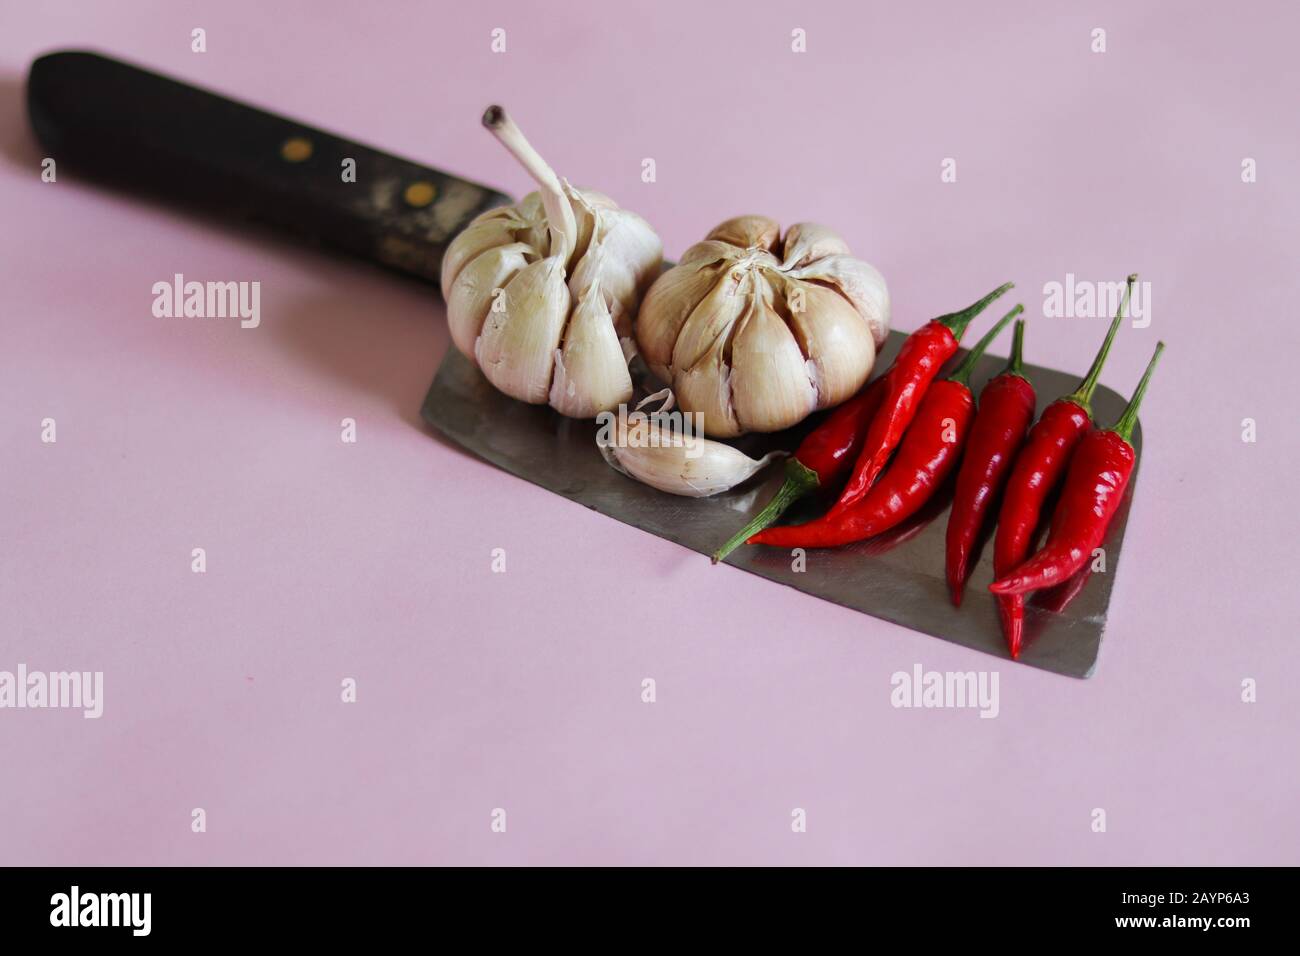 Garlic bulbs and red chilies on a knife against a pink background to show concept of gastronomy, cuisine, cooking and food industry Stock Photo